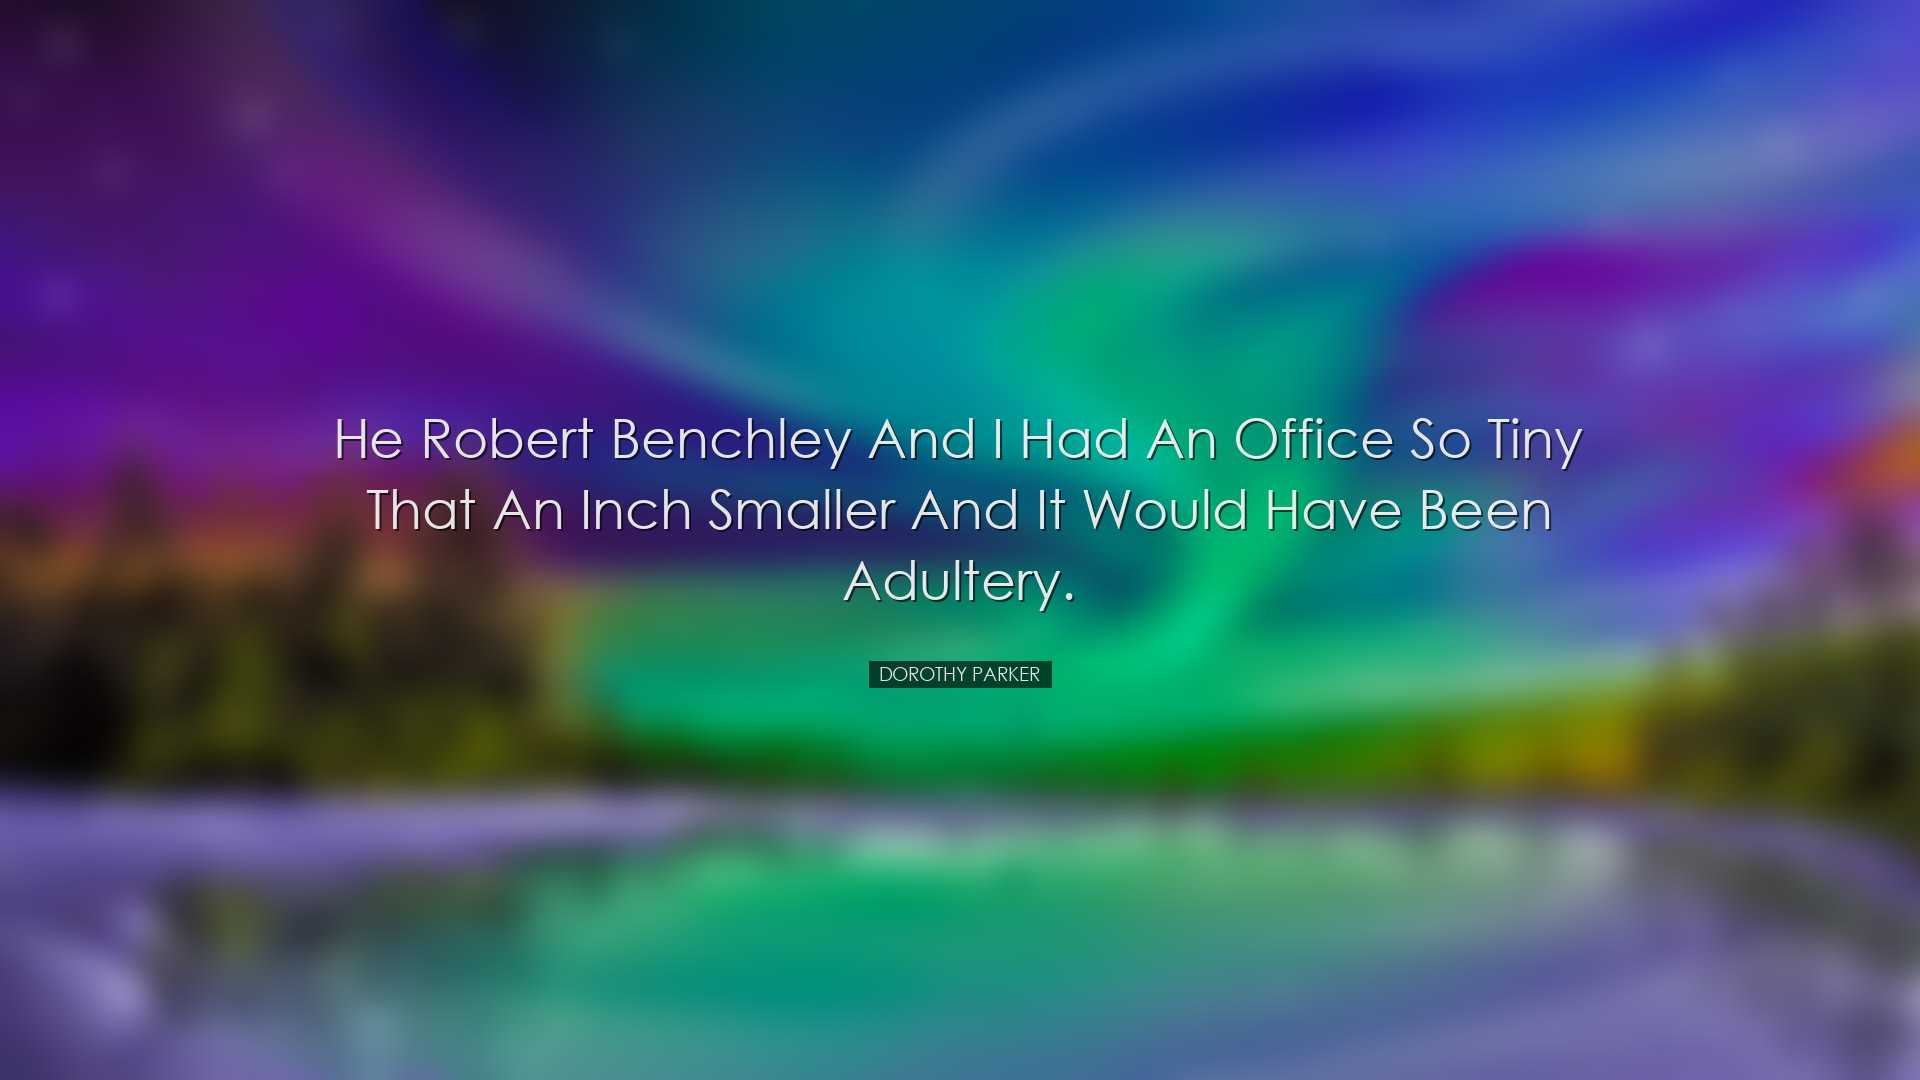 He Robert Benchley and I had an office so tiny that an inch smalle